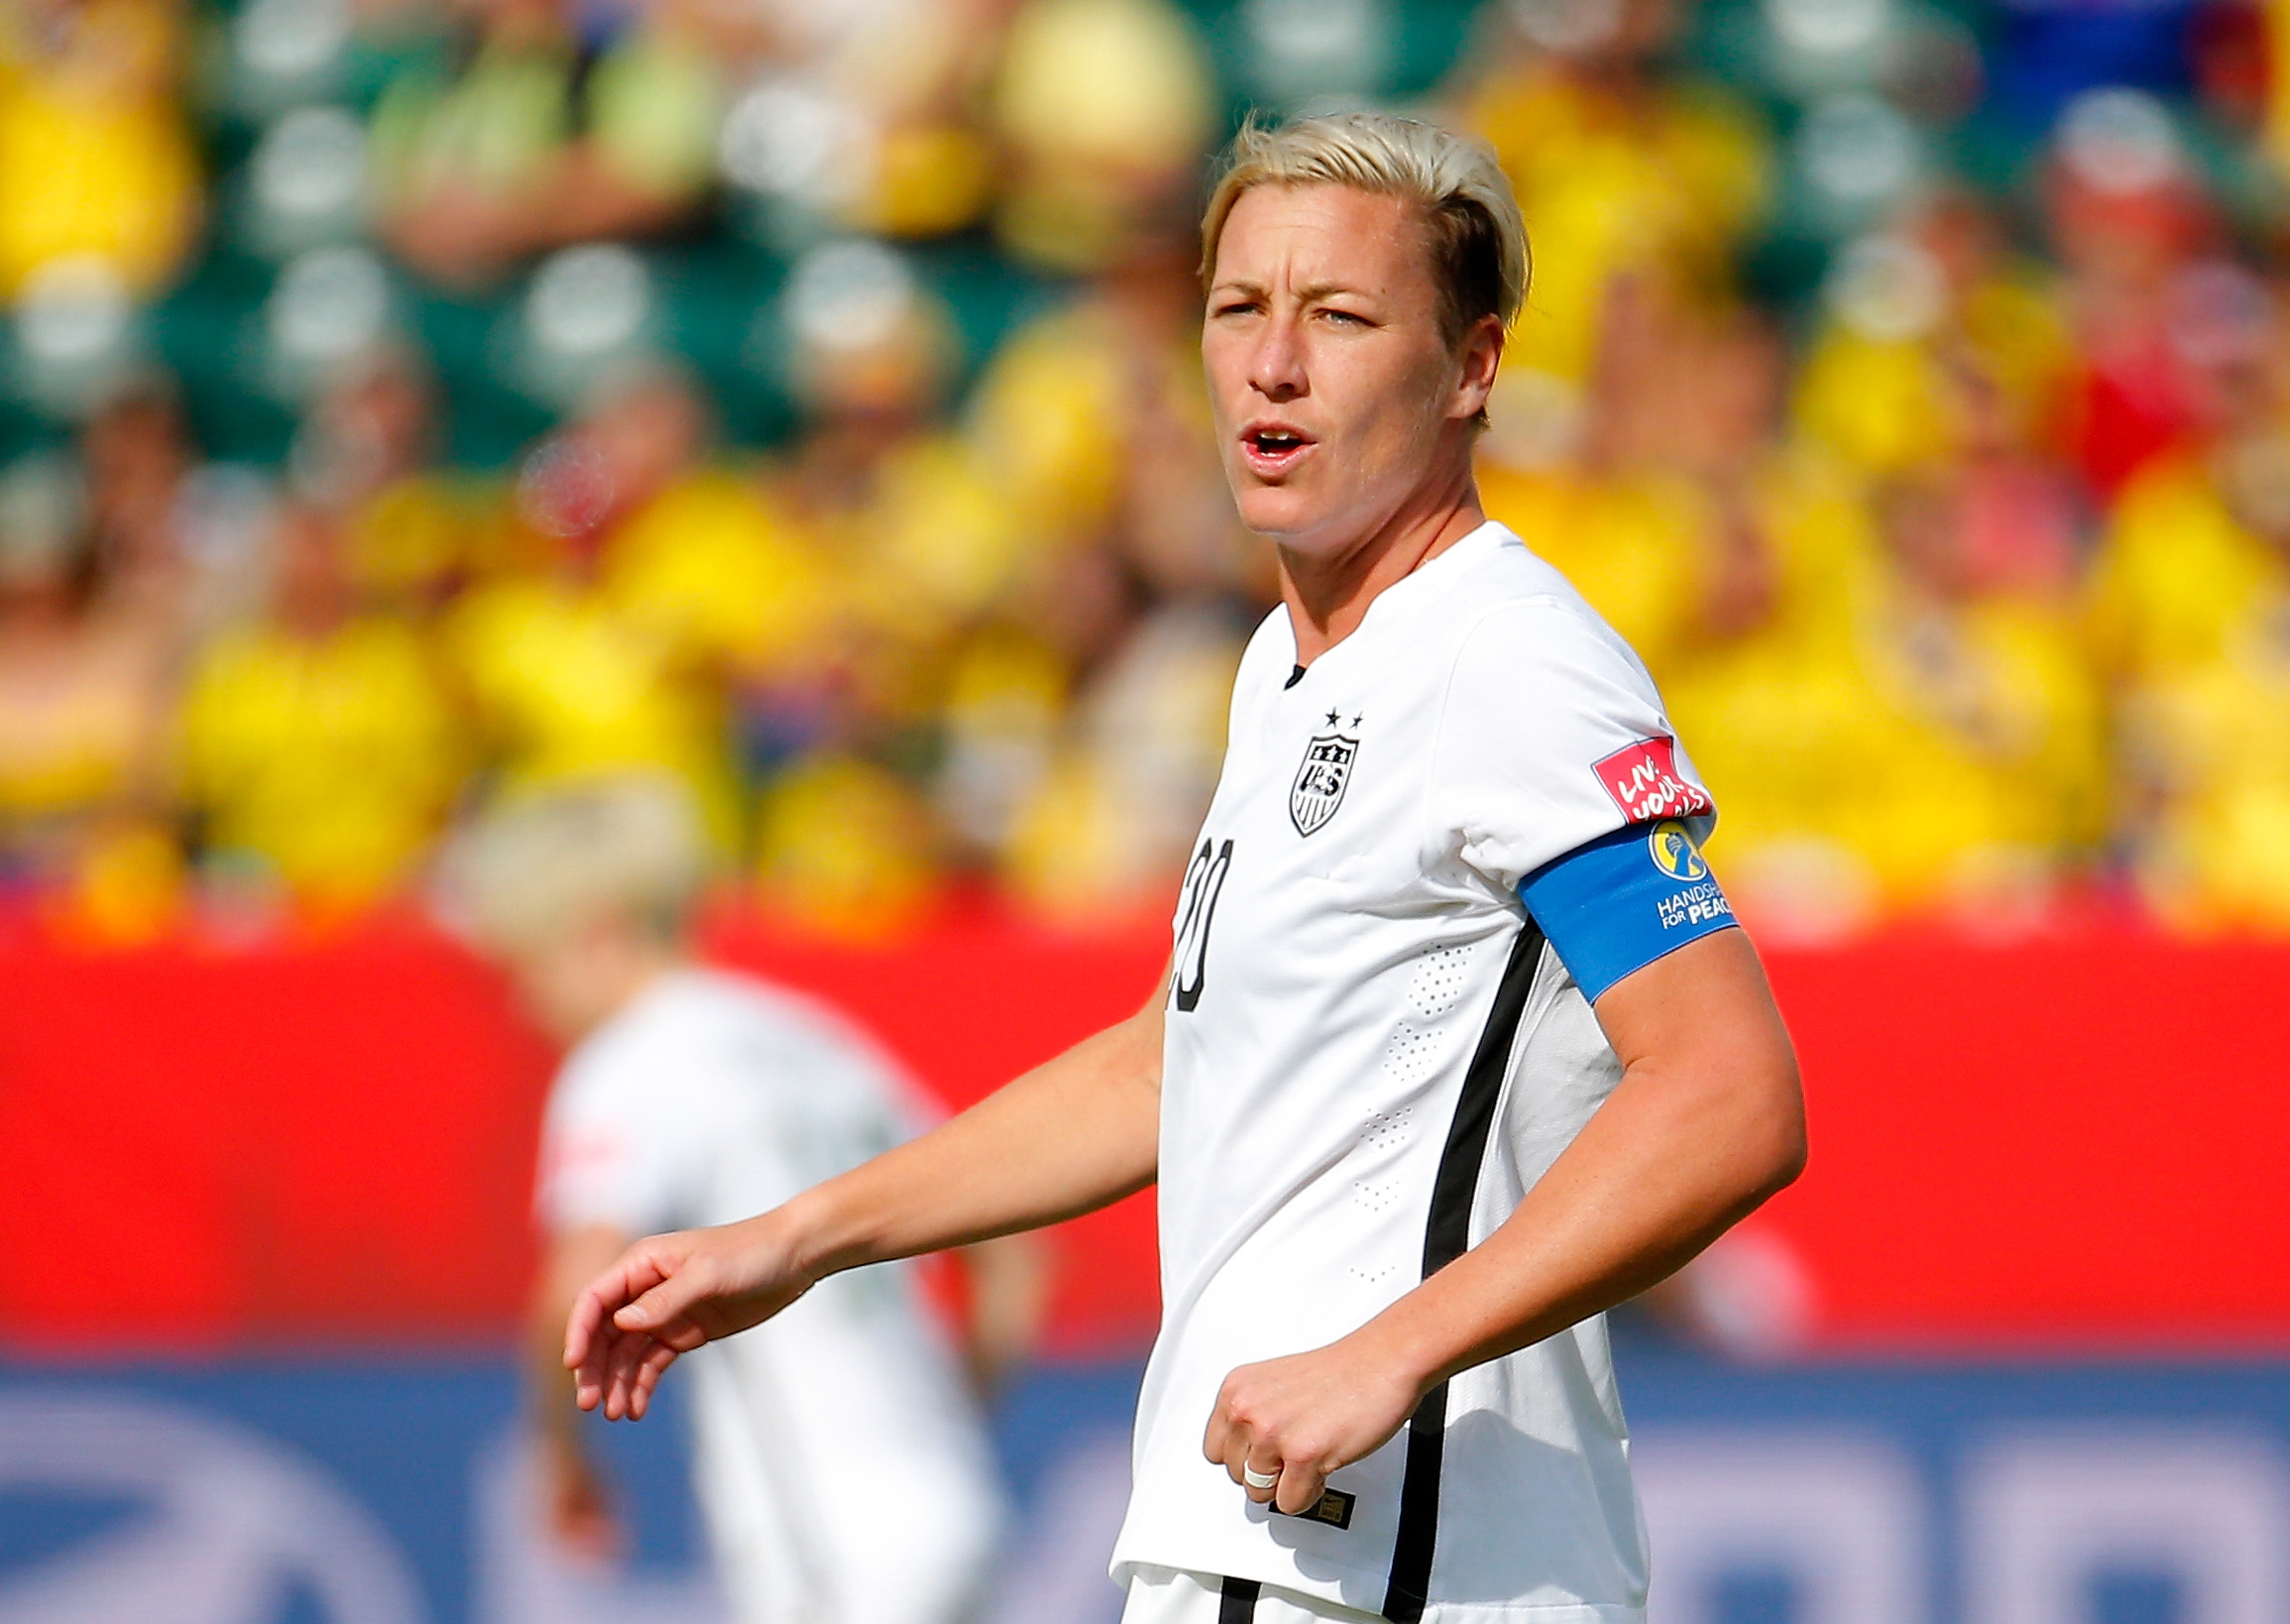 PHOTO: Abby Wambach of the US is seen during during the FIFA Women's World Cup Canada 2015 Round of 16 match between the US and Colombia at Commonwealth Stadium on June 22, 2015 in Edmonton, Canada.